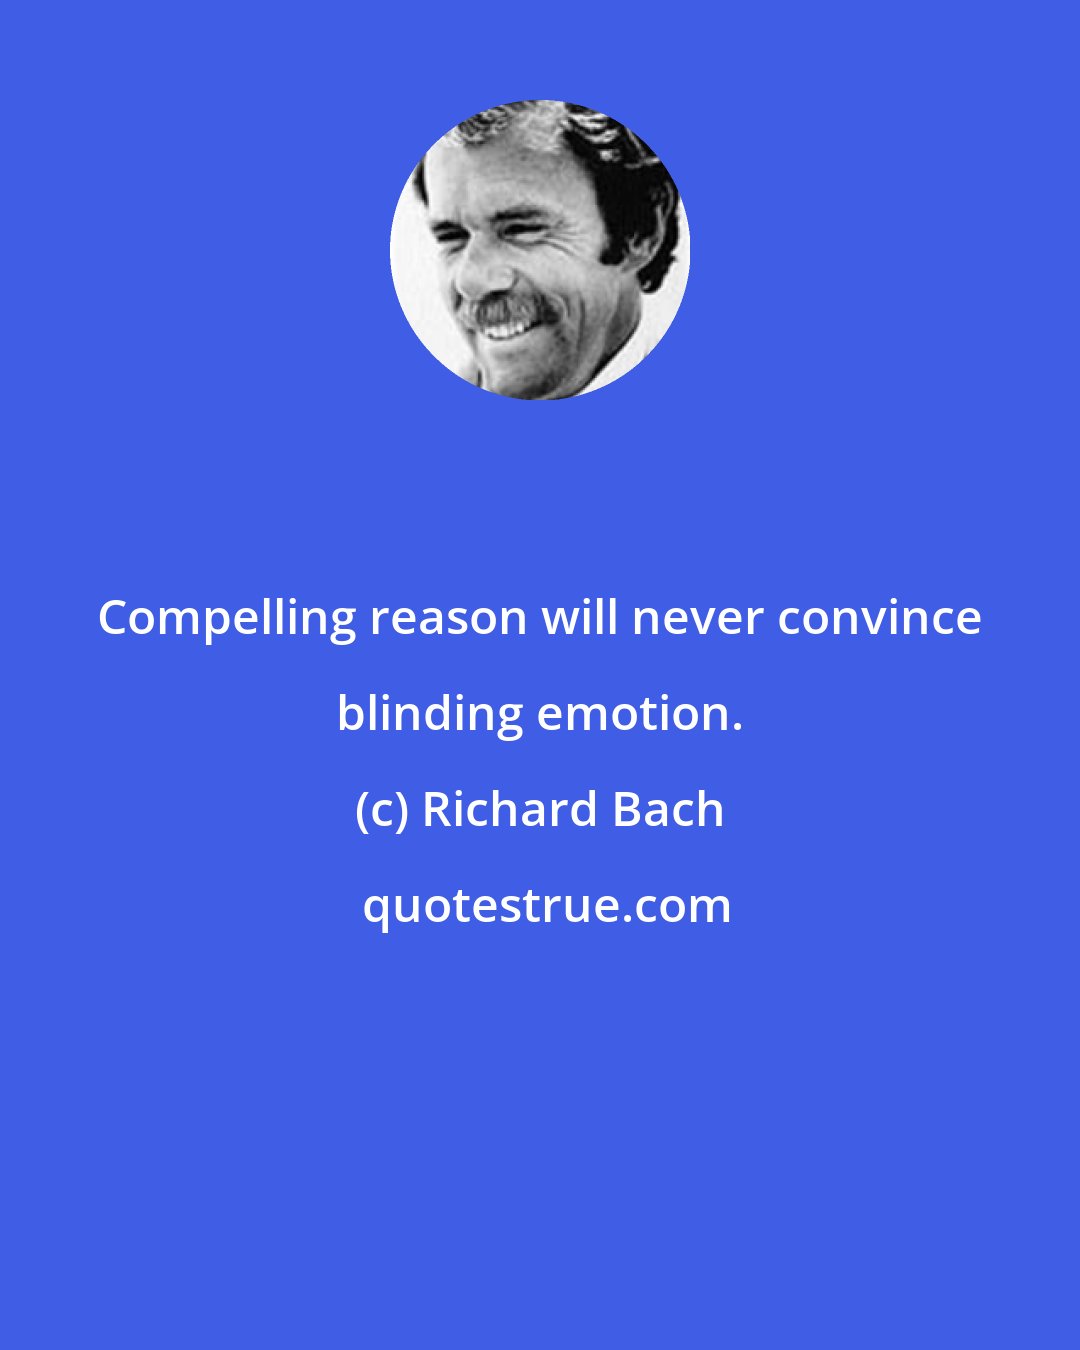 Richard Bach: Compelling reason will never convince blinding emotion.